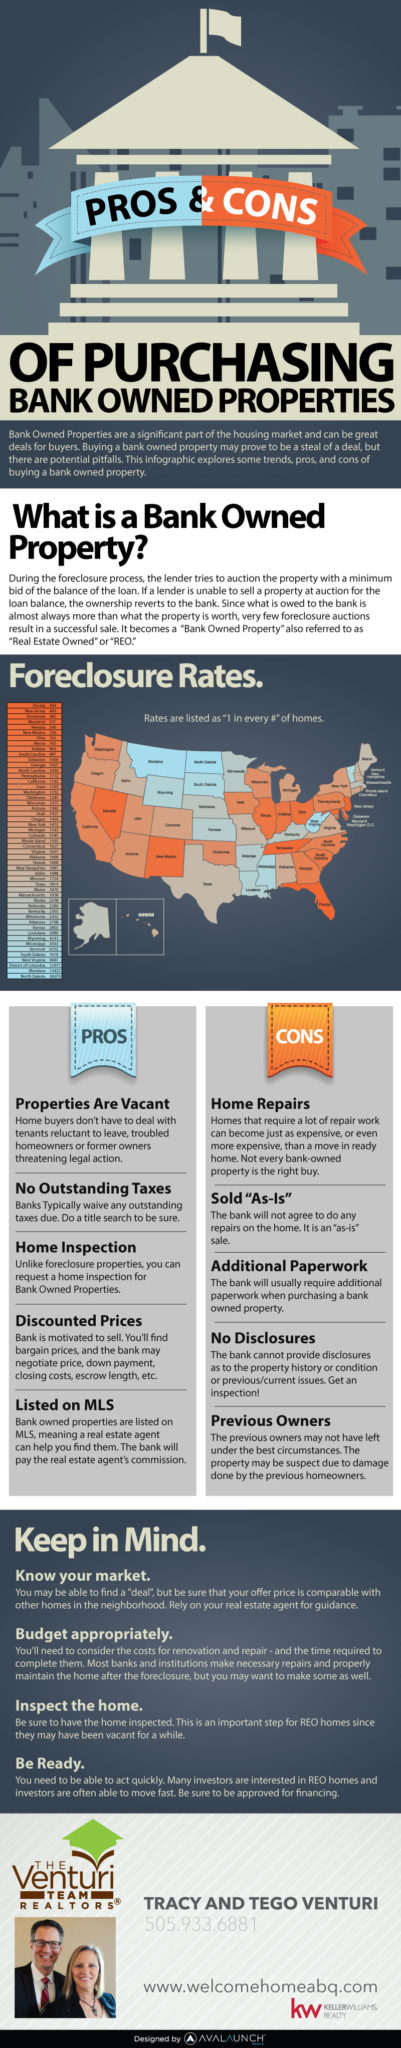 Pros and Cons of Purchasing Foreclosures